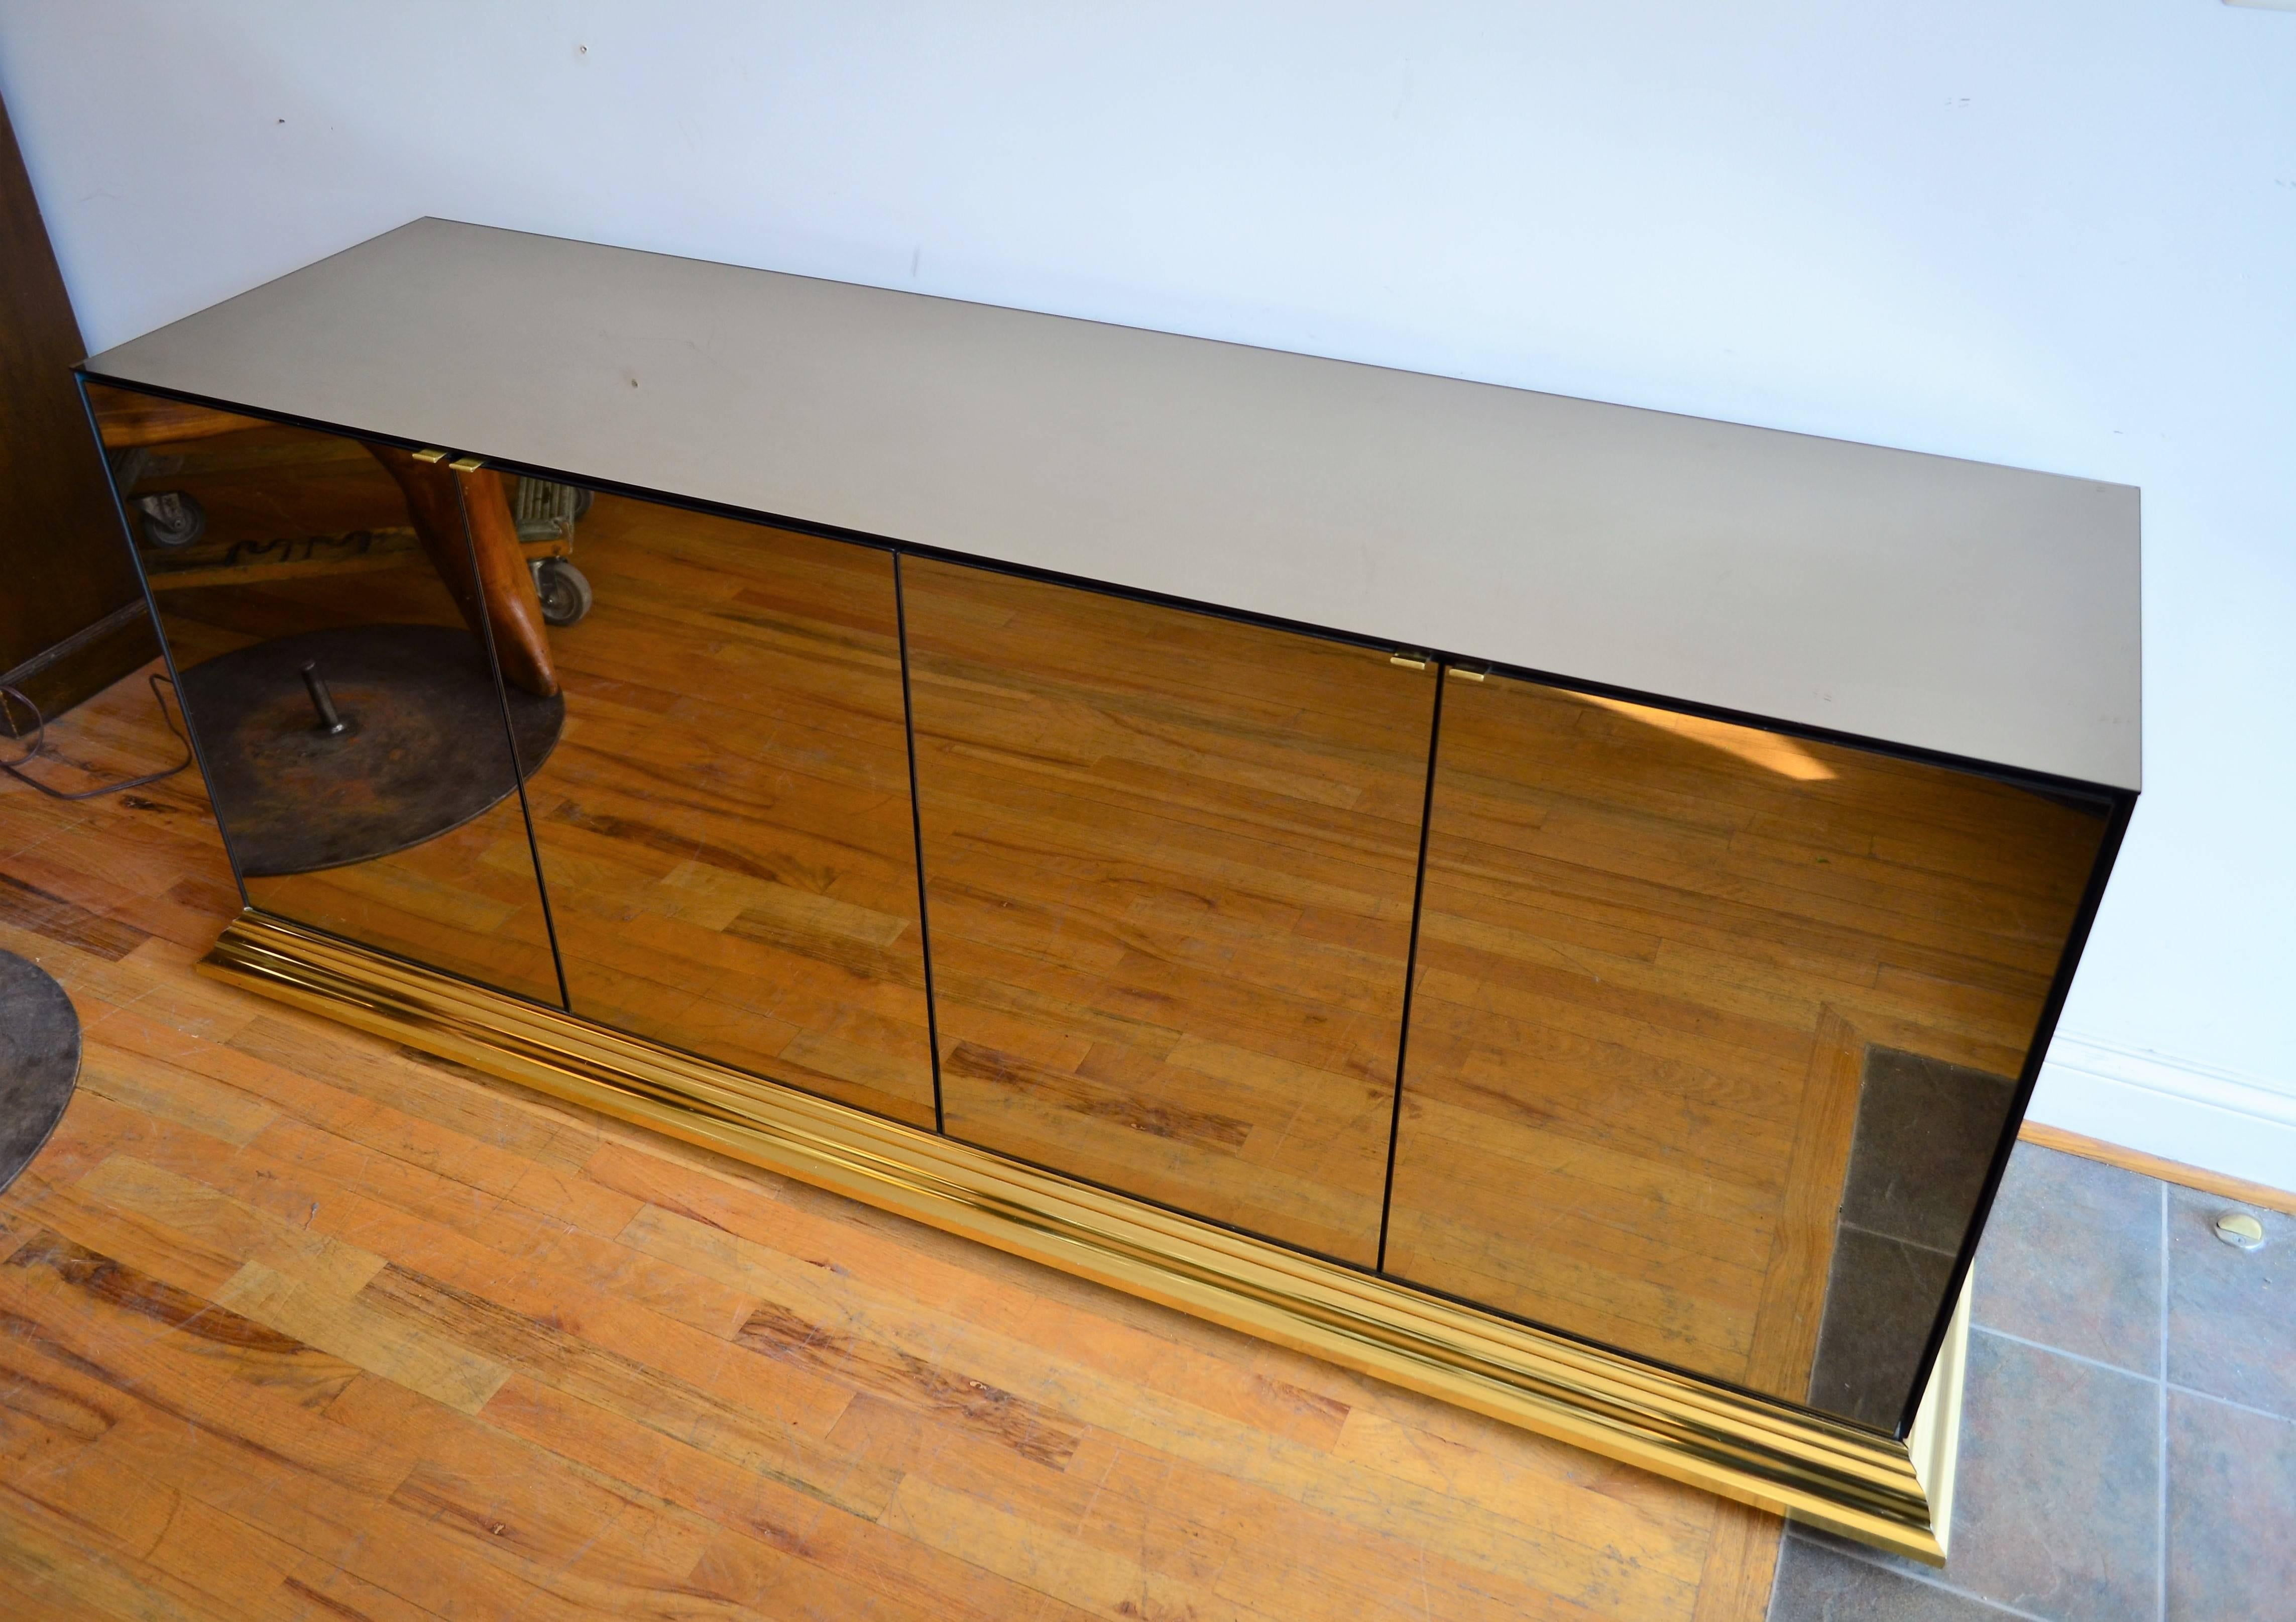 
An elegant bronze tinted mirrored buffet by Ello.
The cabinet is mounted on a brass base.